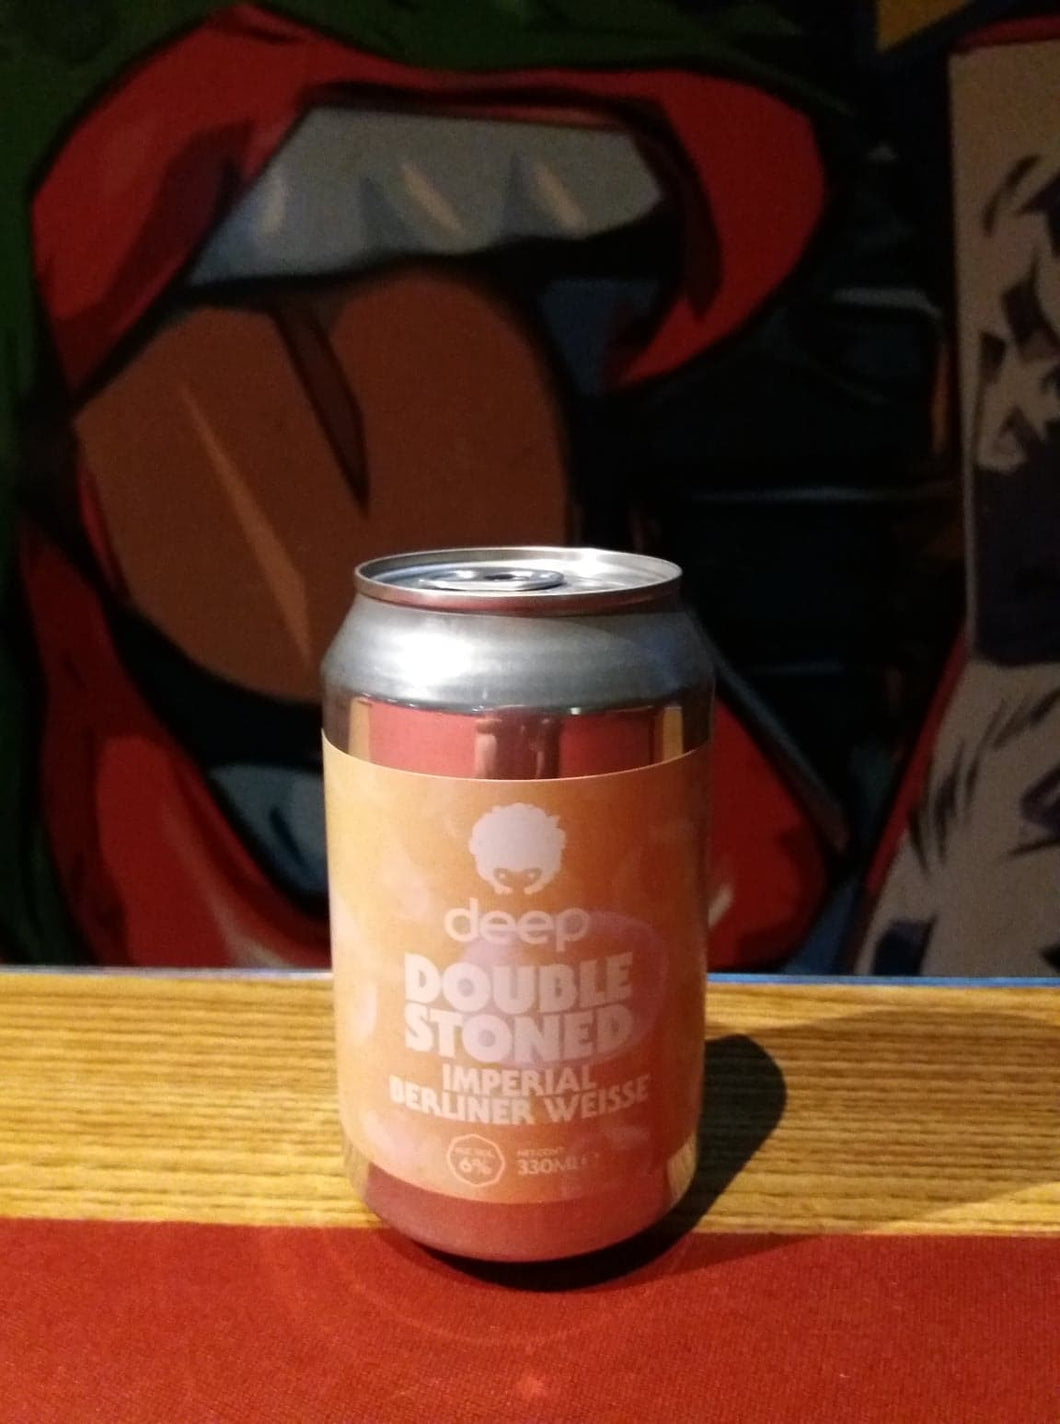 CoolHead Brew Deep Double Stoned